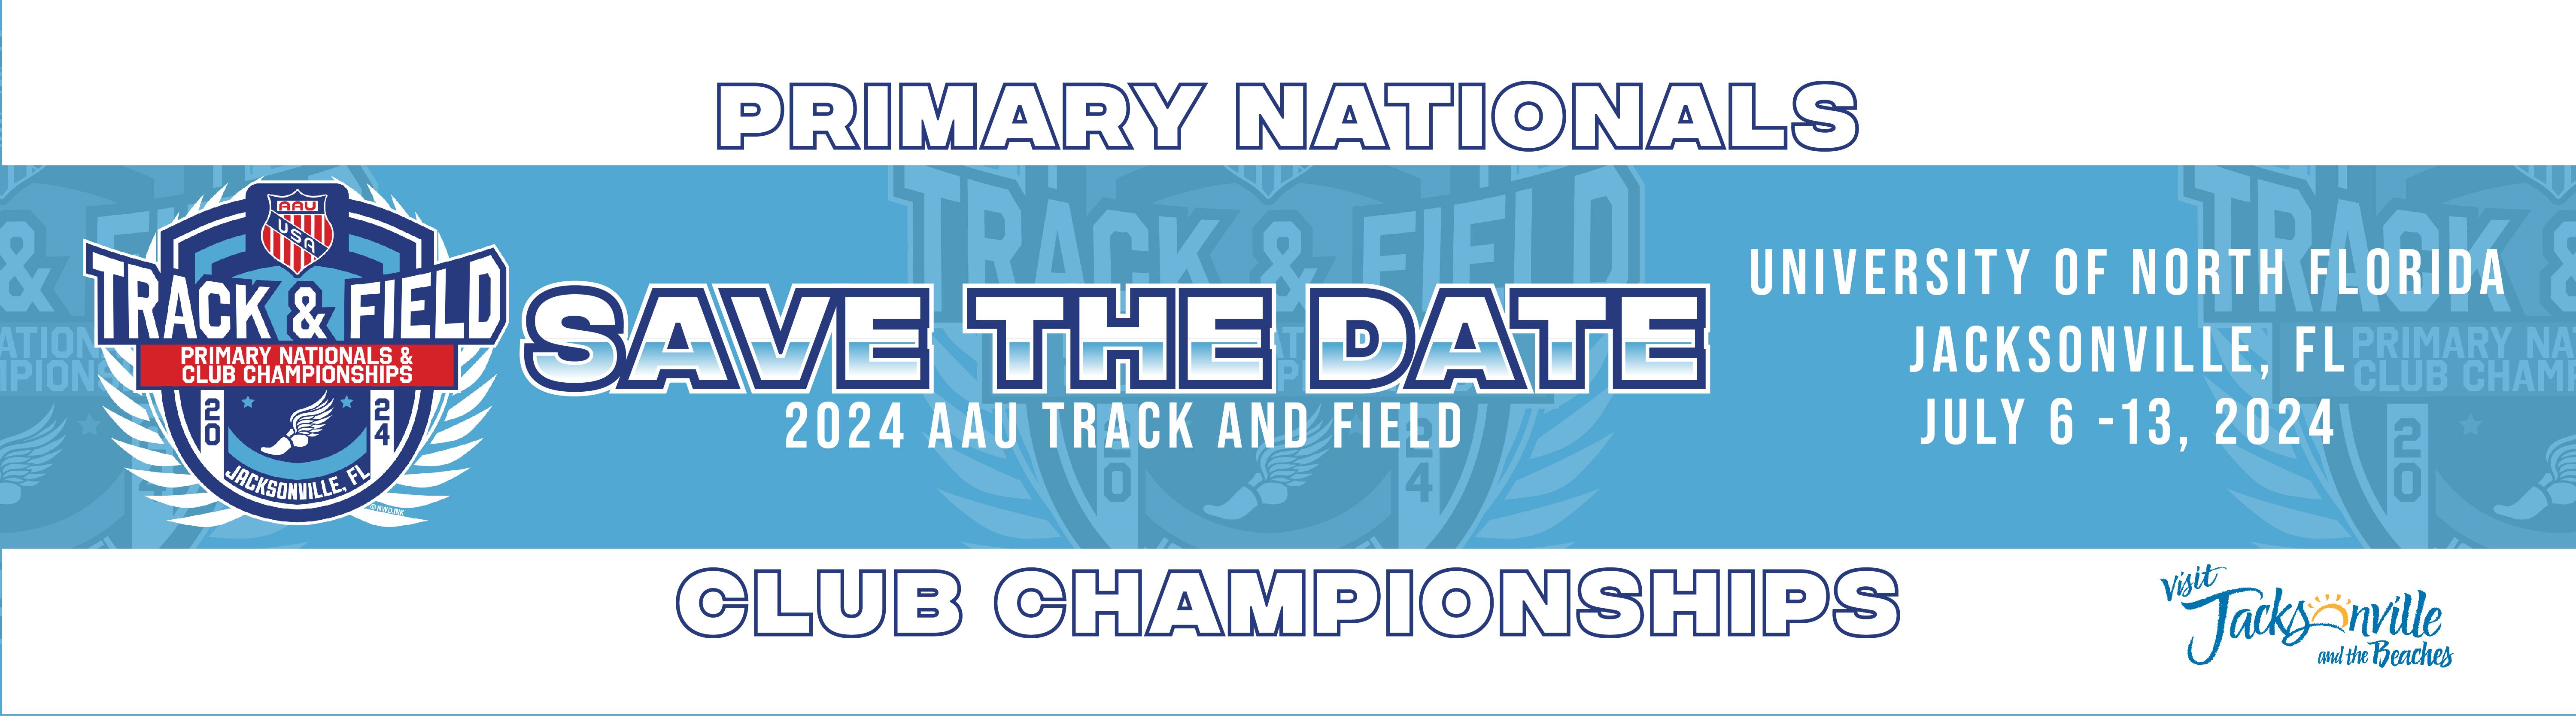 Primary Nationals and Club Championships